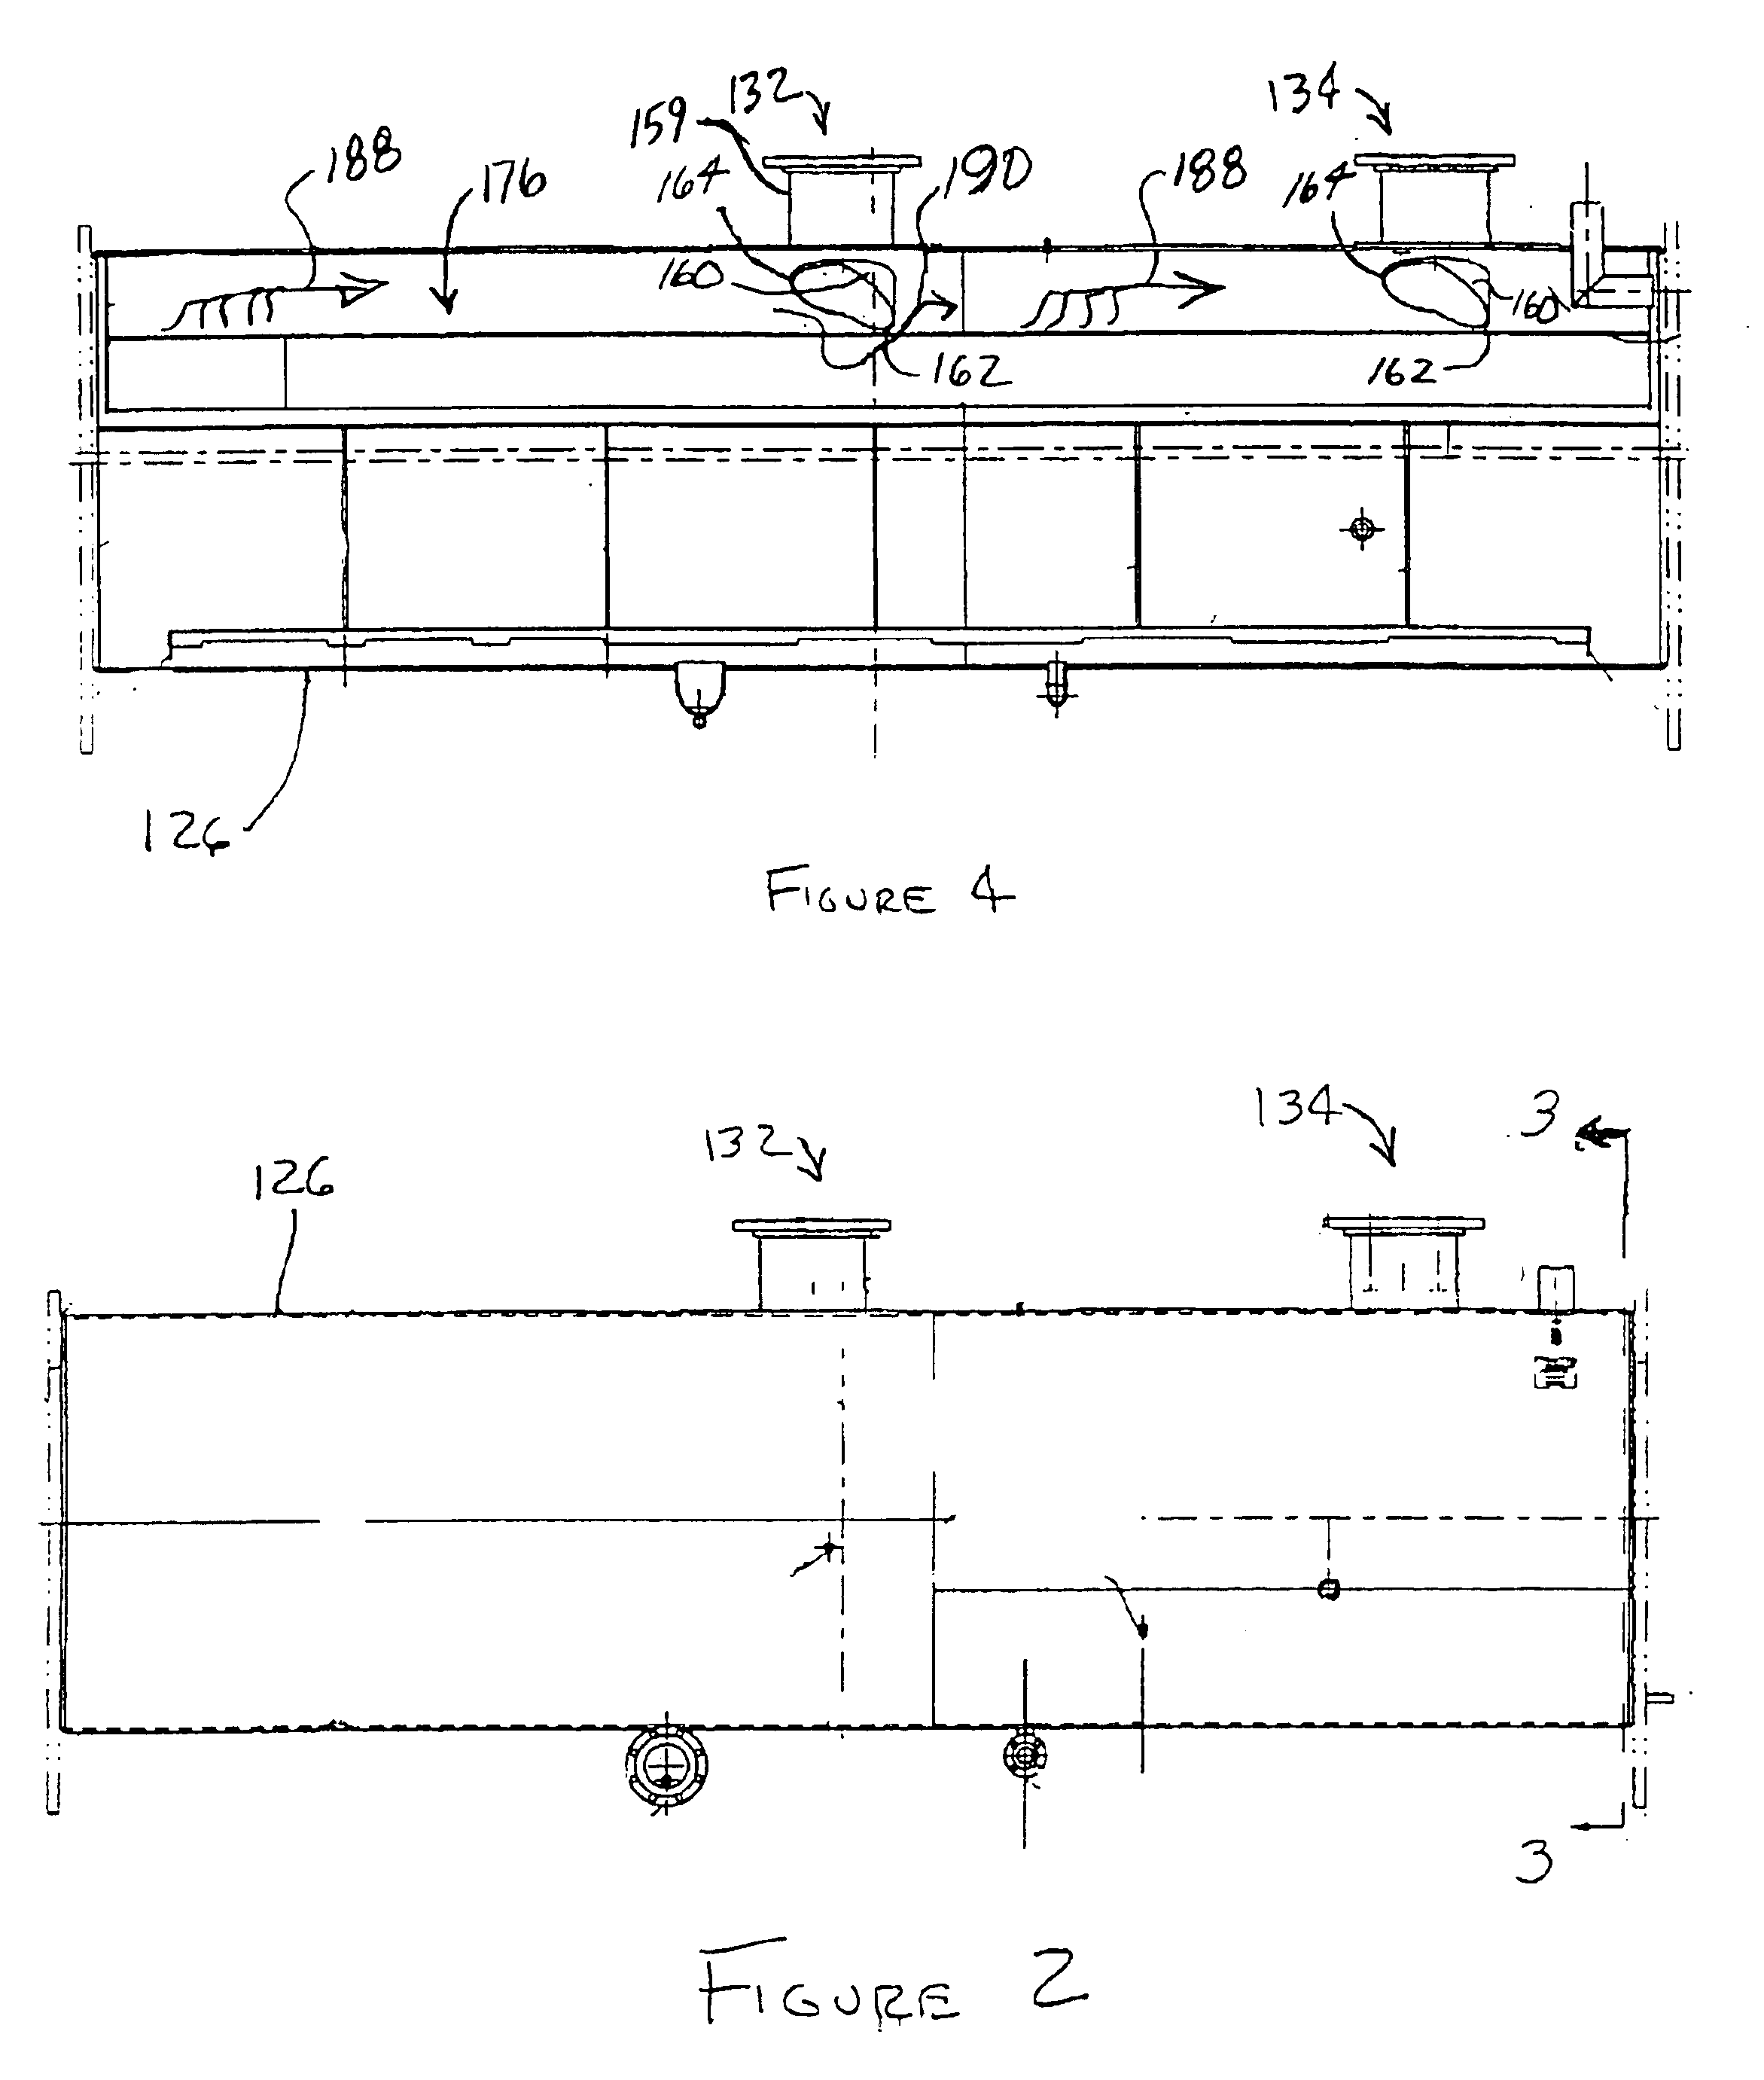 Suction connection for dual centrifugal compressor refrigeration systems